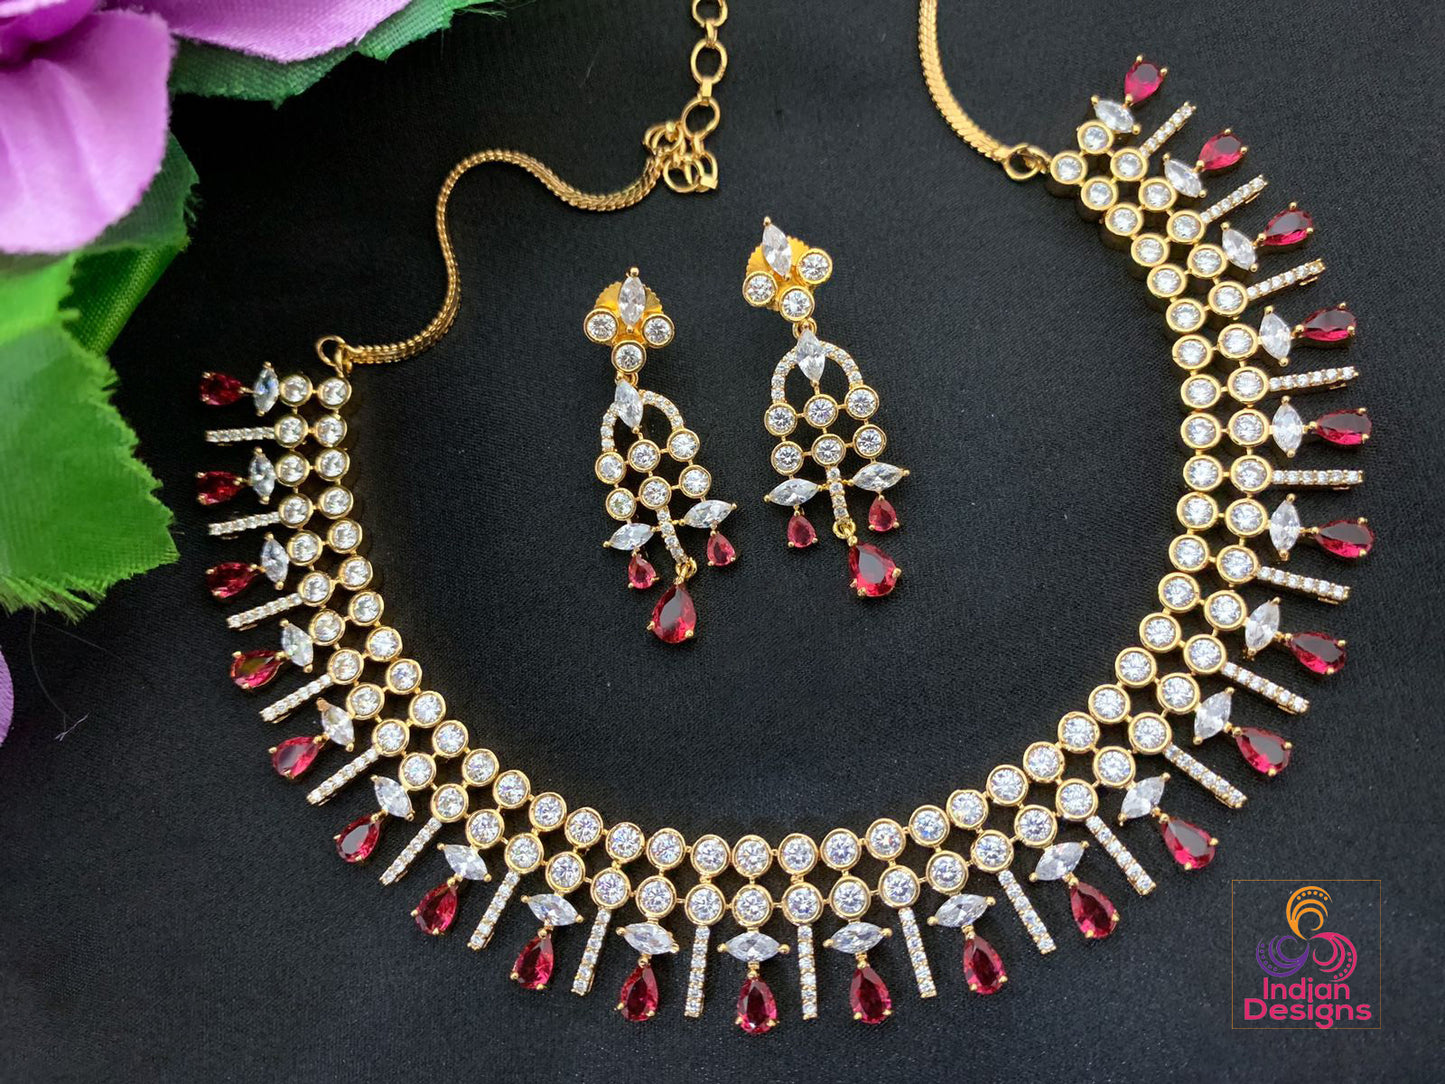 Gold-plated Pink American diamond necklace jewelry | Rose quartz crystal necklace | statement necklace and earring set | Indian Designs